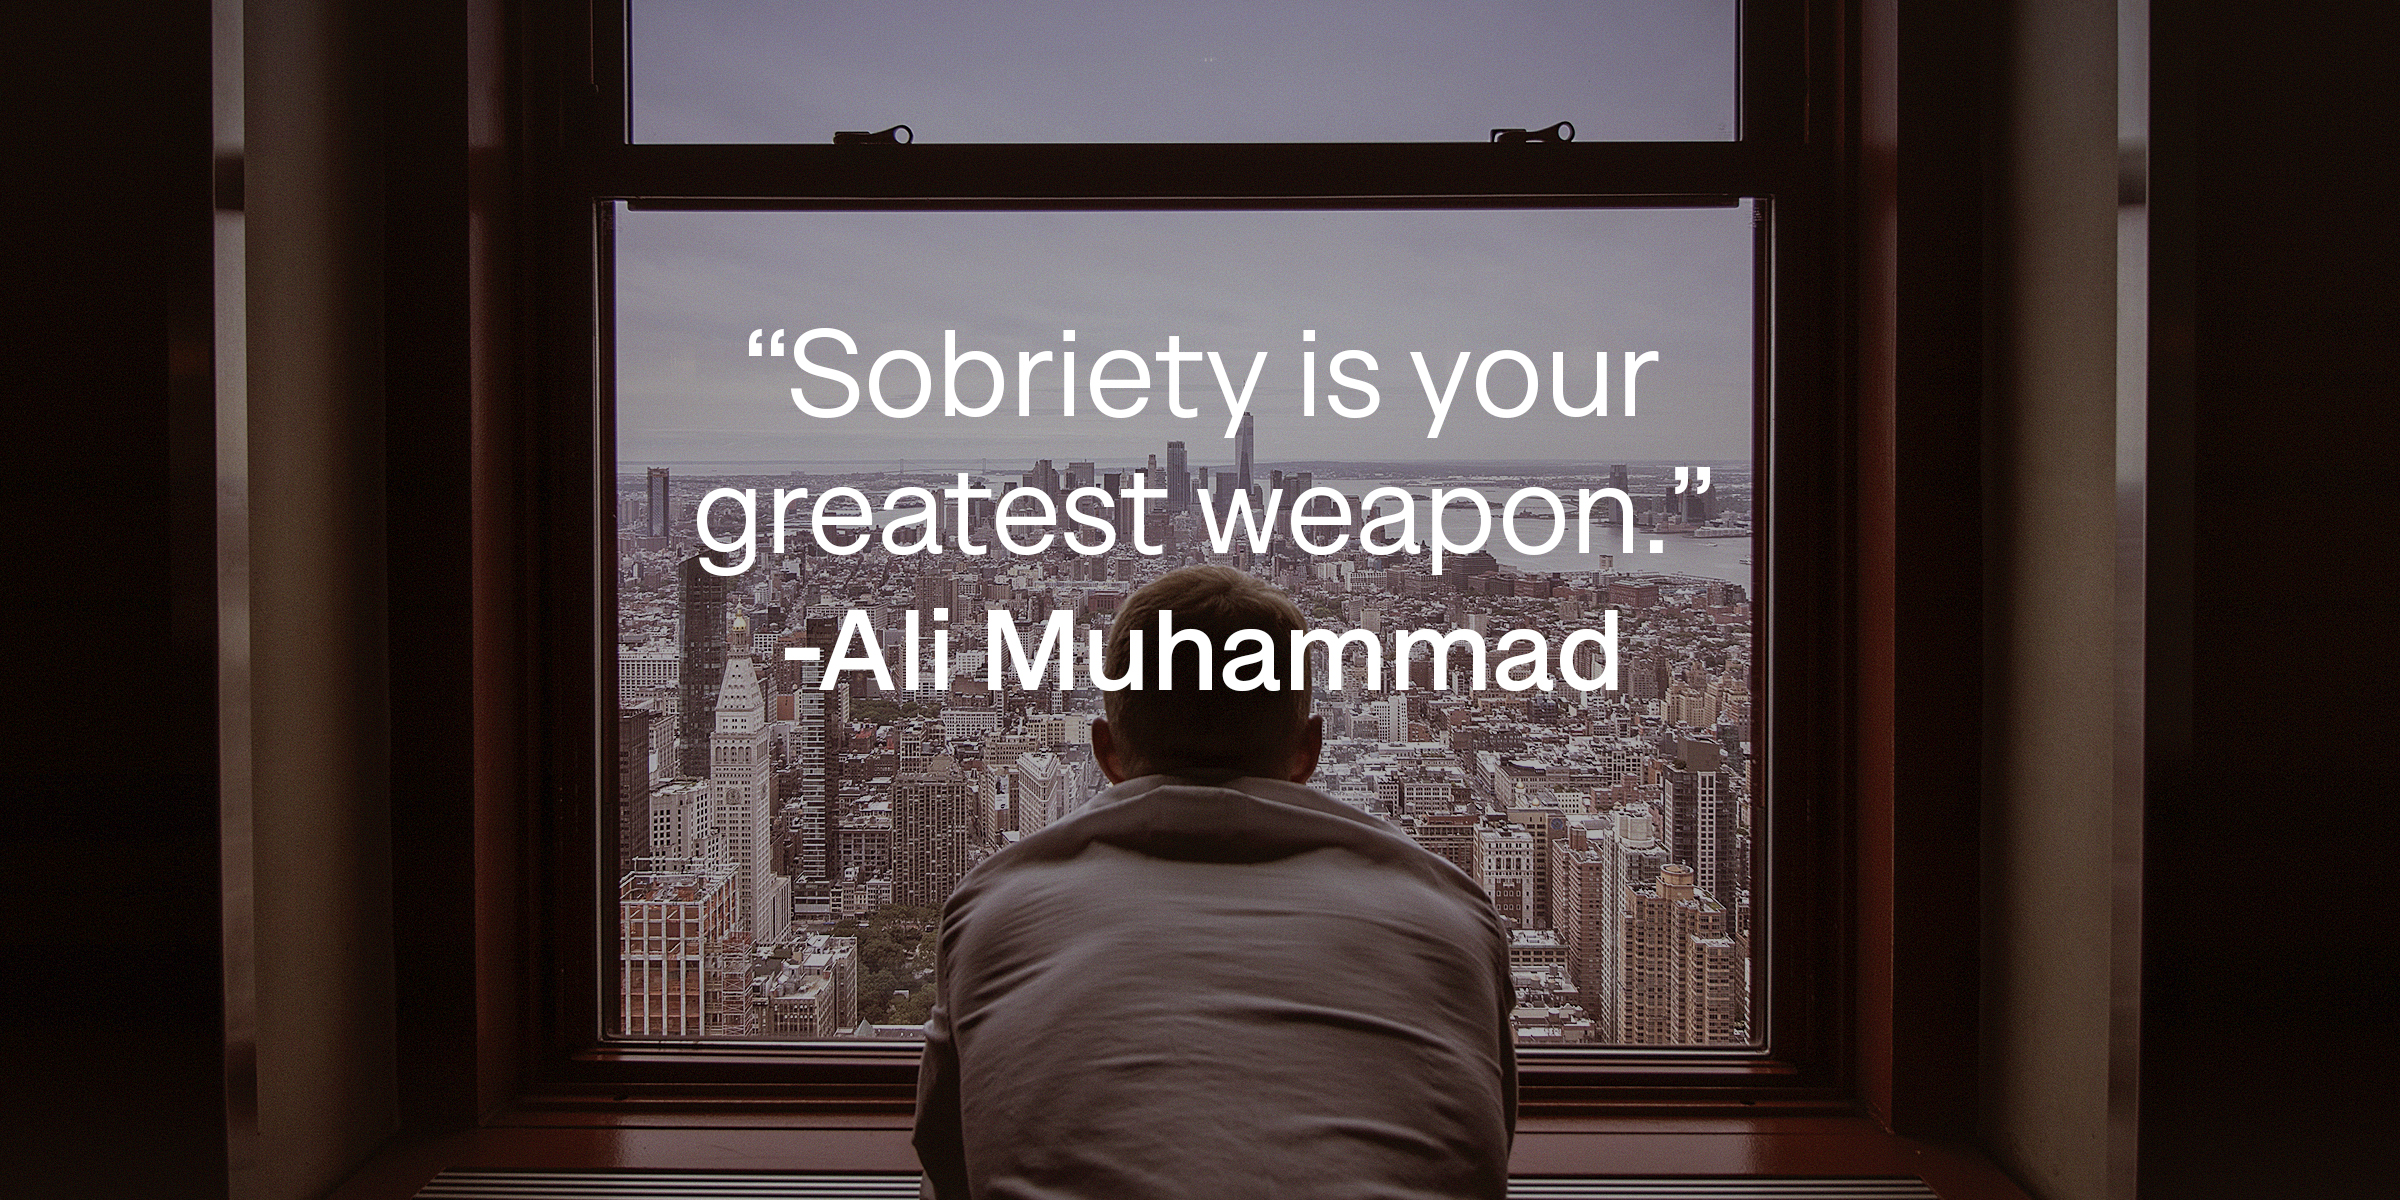 A photo of a man looking out the window with Ali Muhammad's quote, "Sobriety is your greatest weapon." | Source: unsplash.com